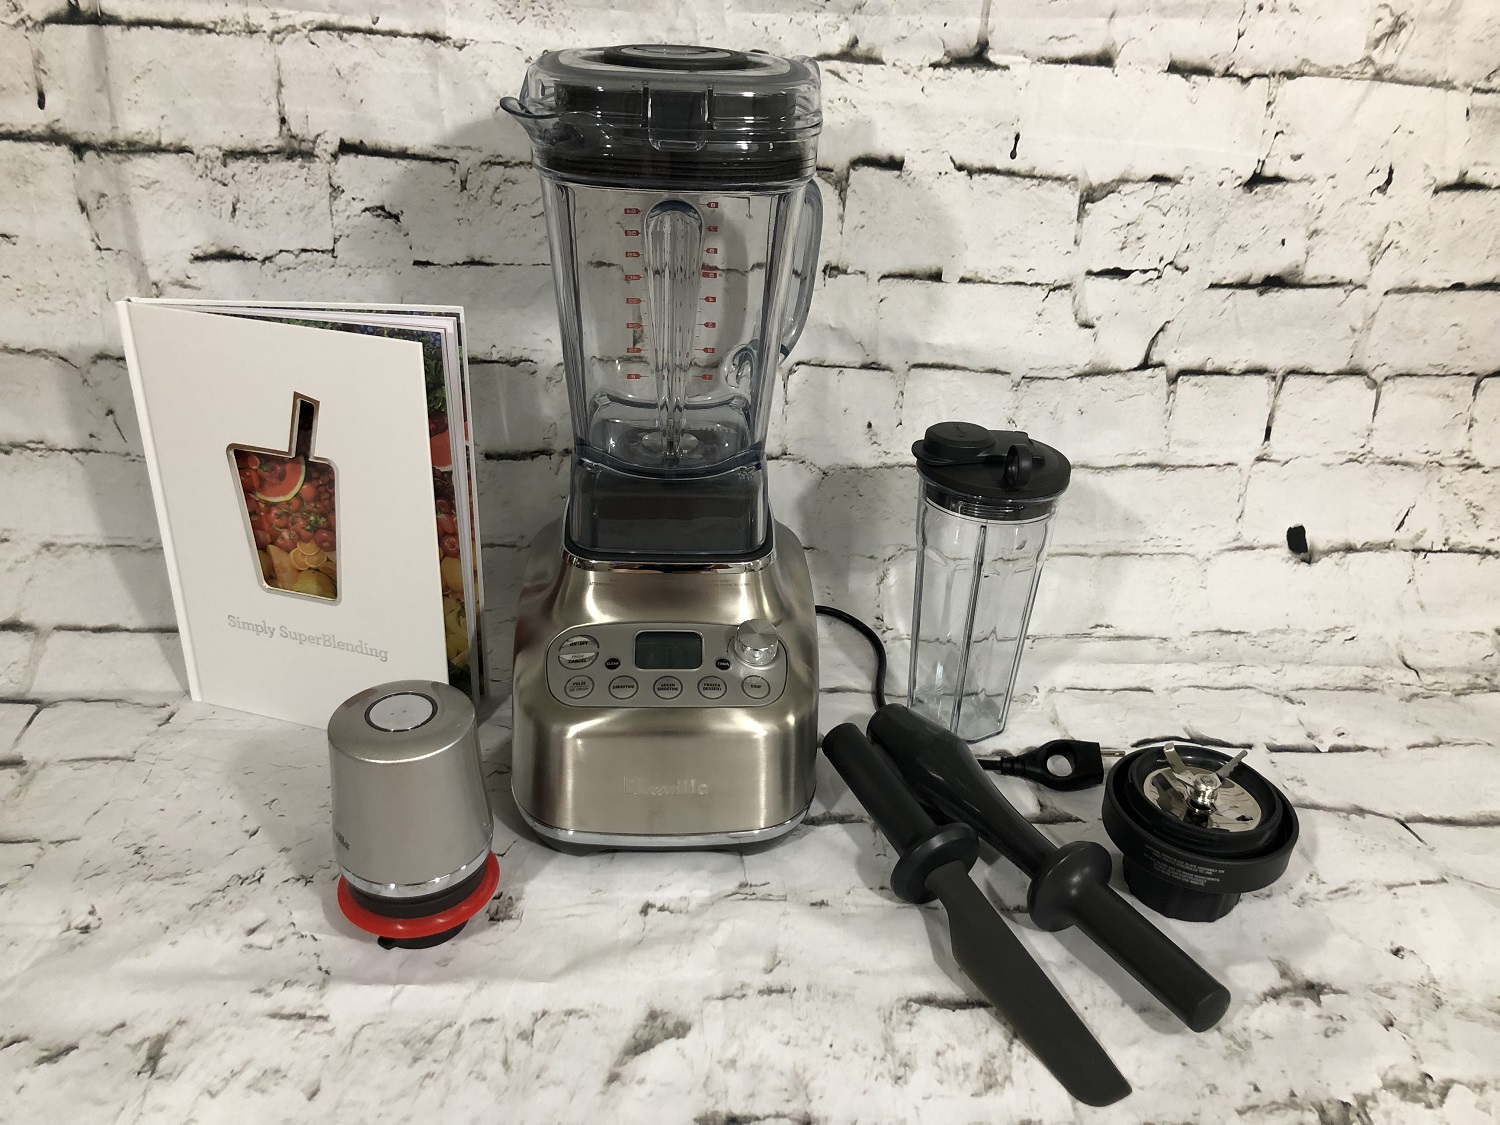 Most Silent Blender in the World